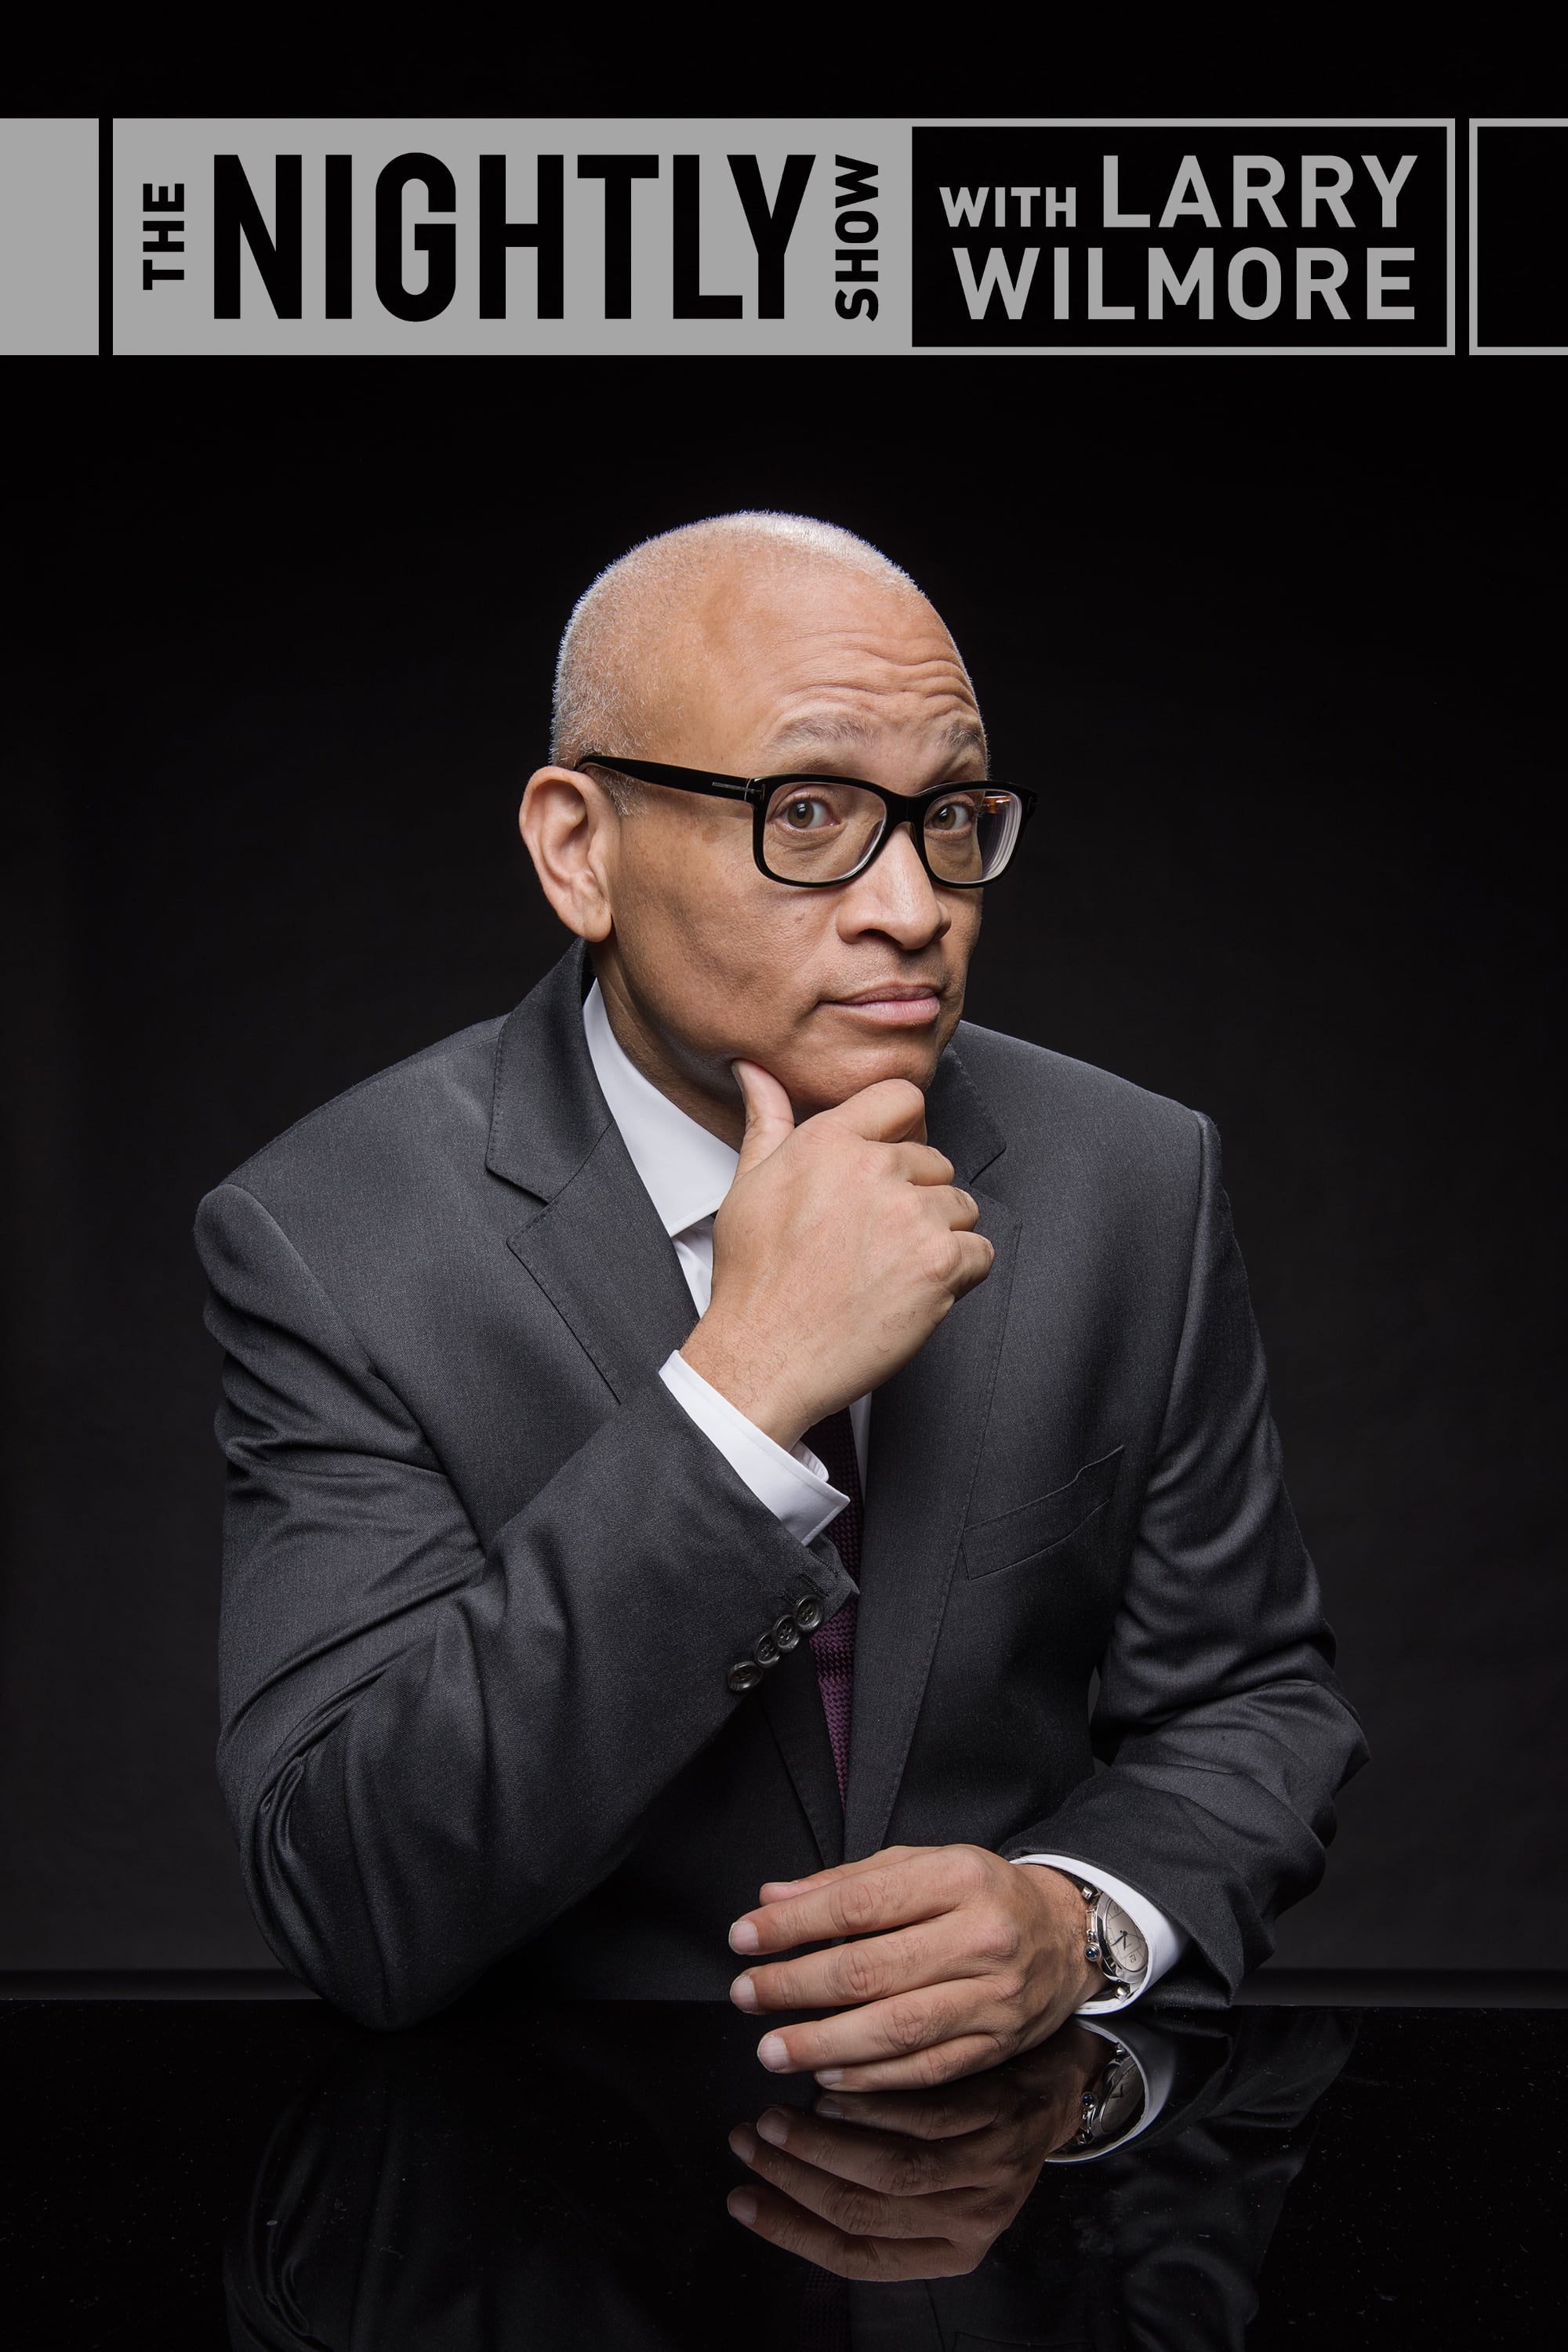 The Nightly Show with Larry Wilmore (2015)